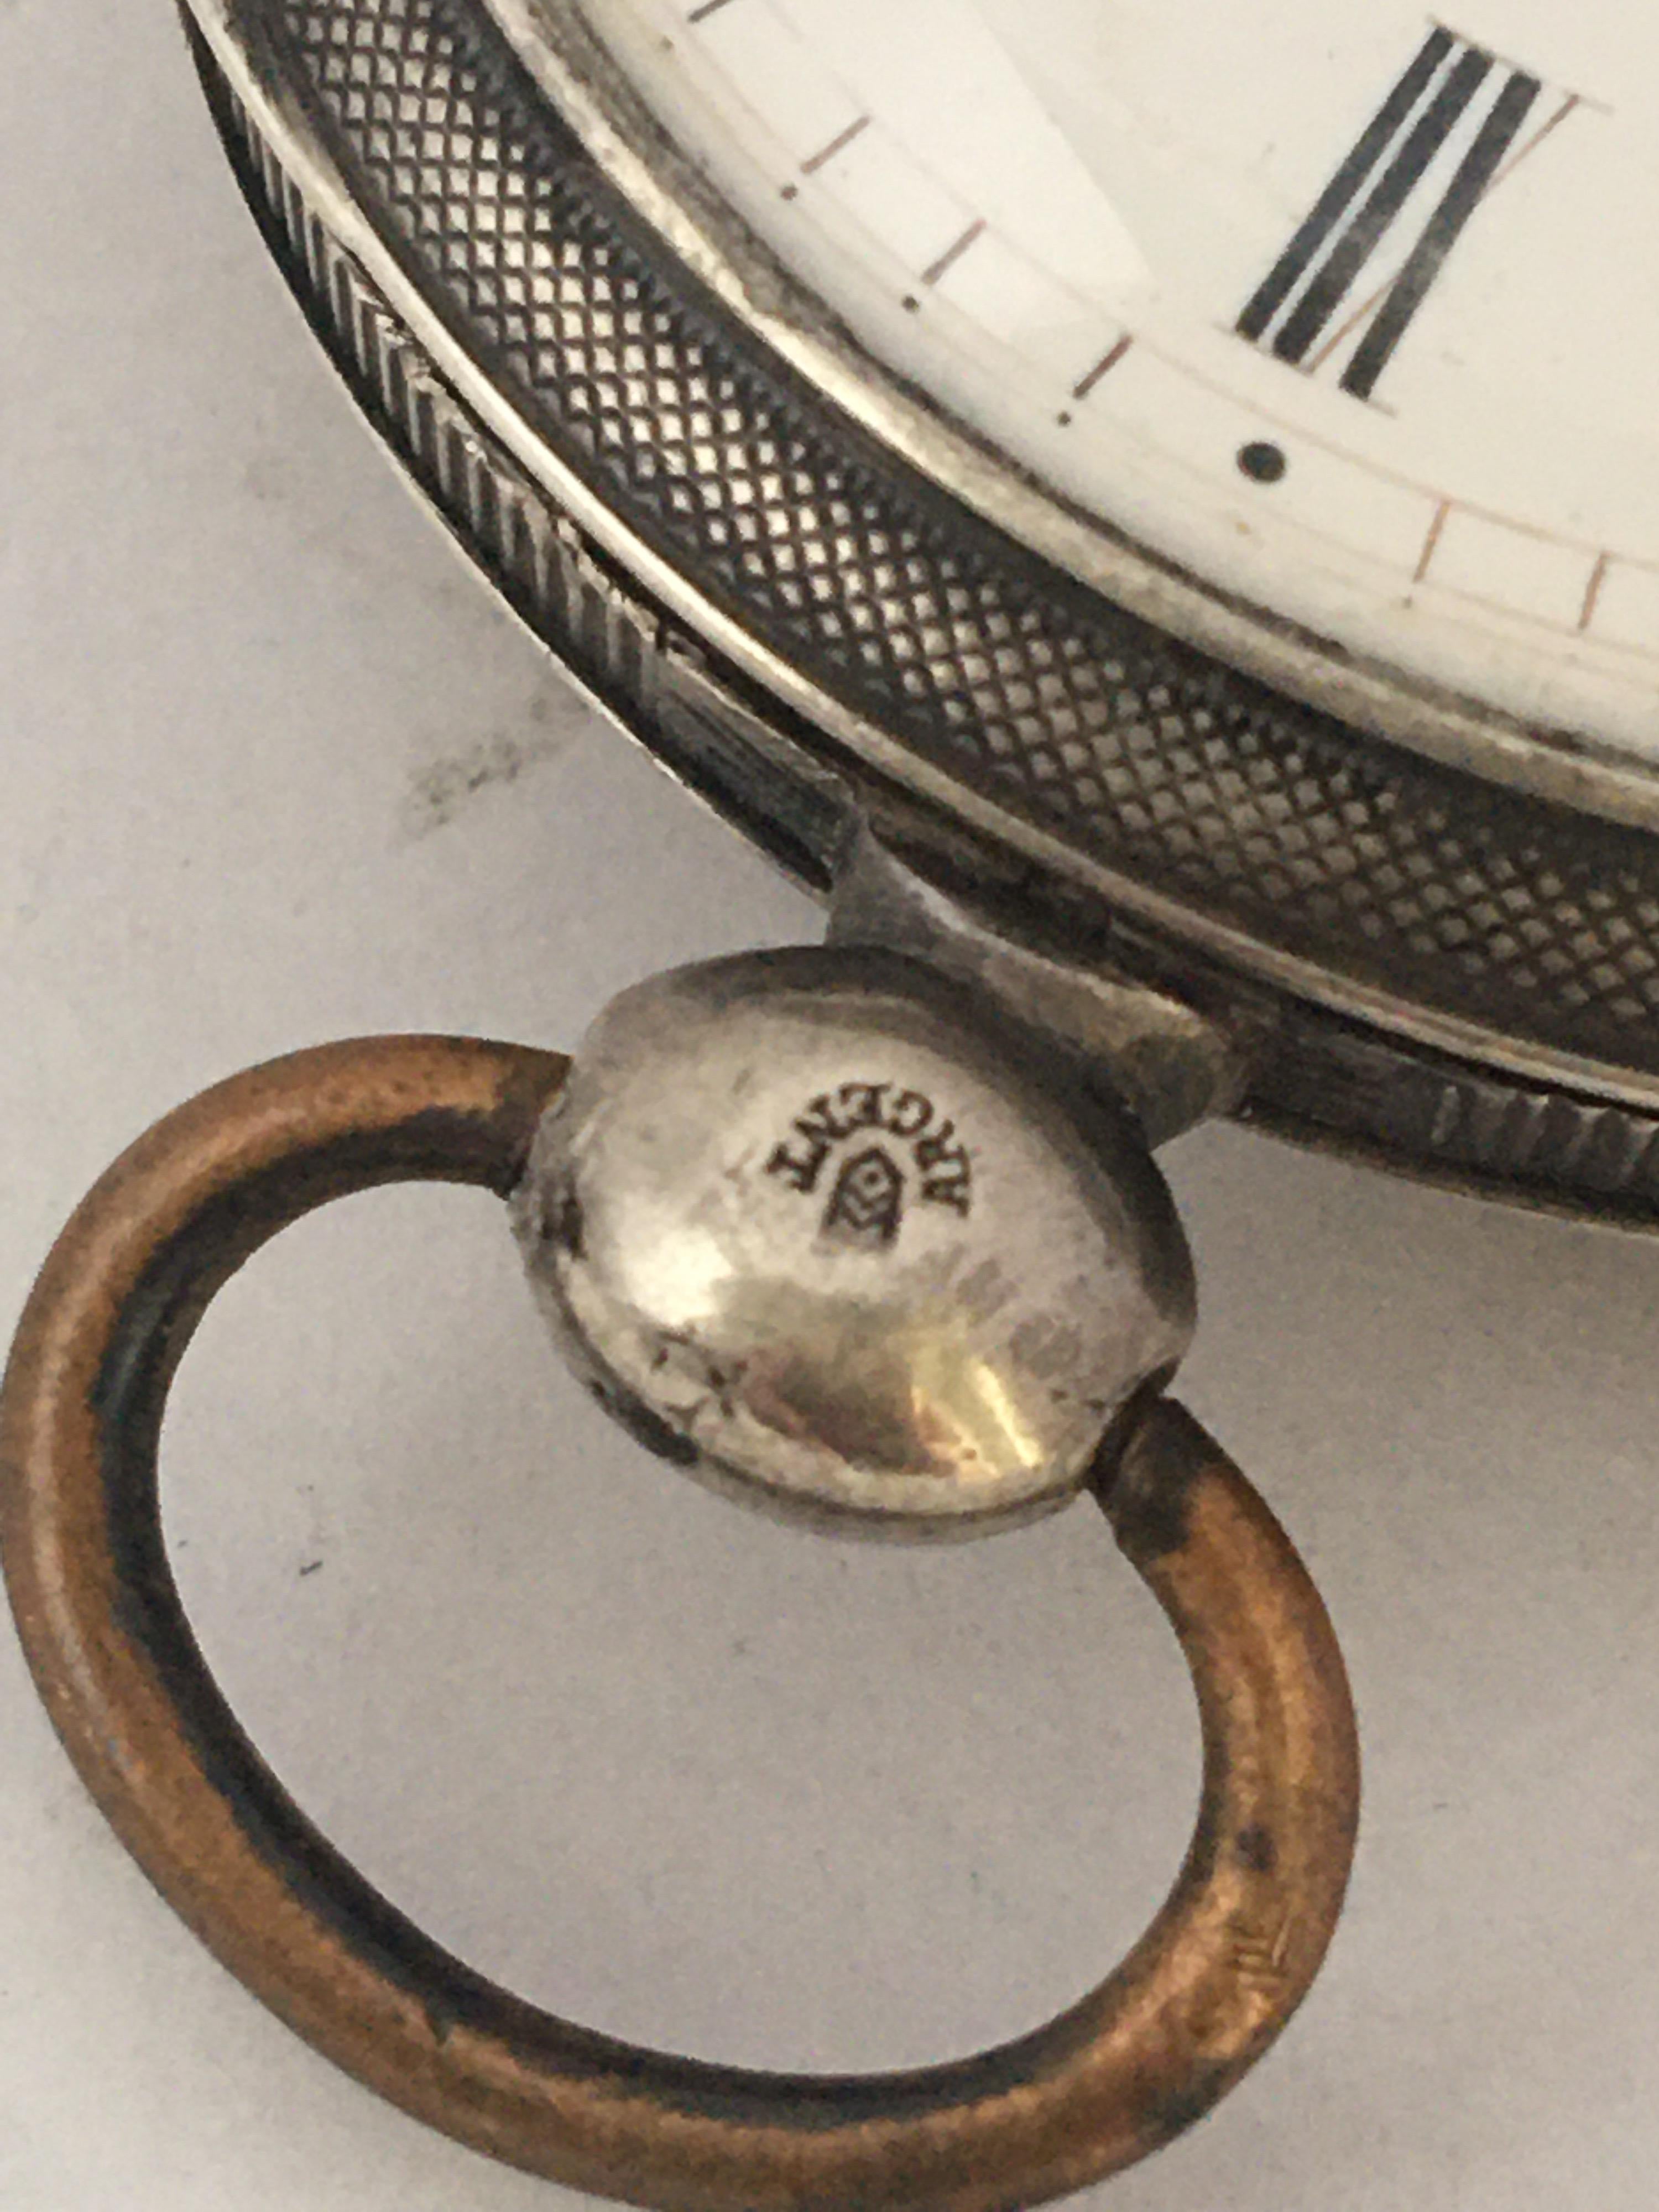 Early Rare Verge Fusee Silver Pocket Watch In Good Condition For Sale In Carlisle, GB